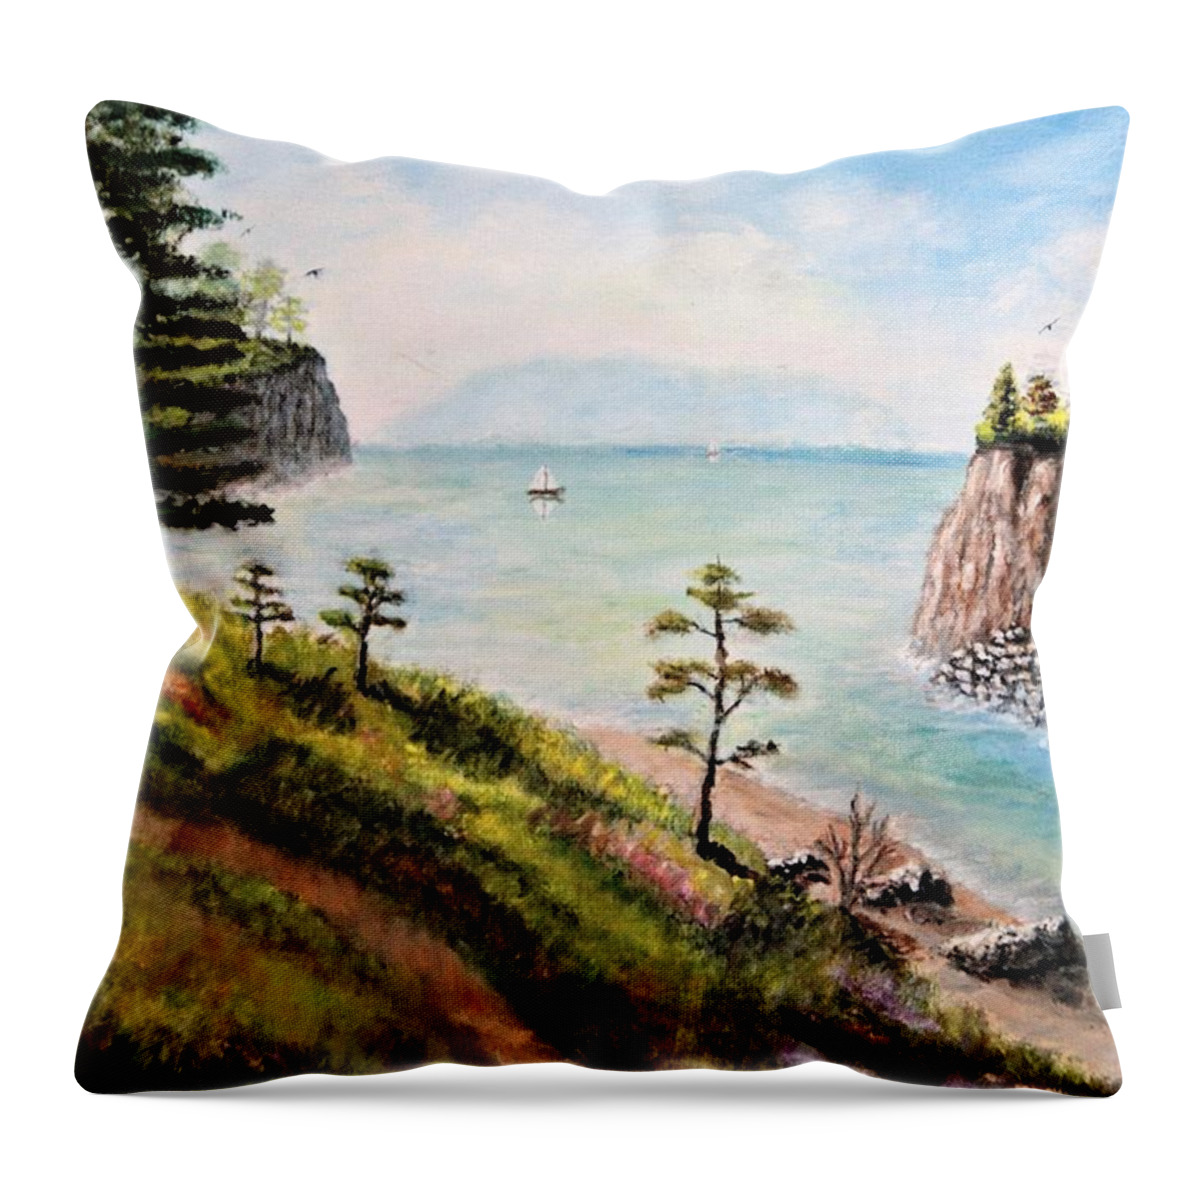 Landscape Throw Pillow featuring the painting Northwest Coast by Gregory Dorosh